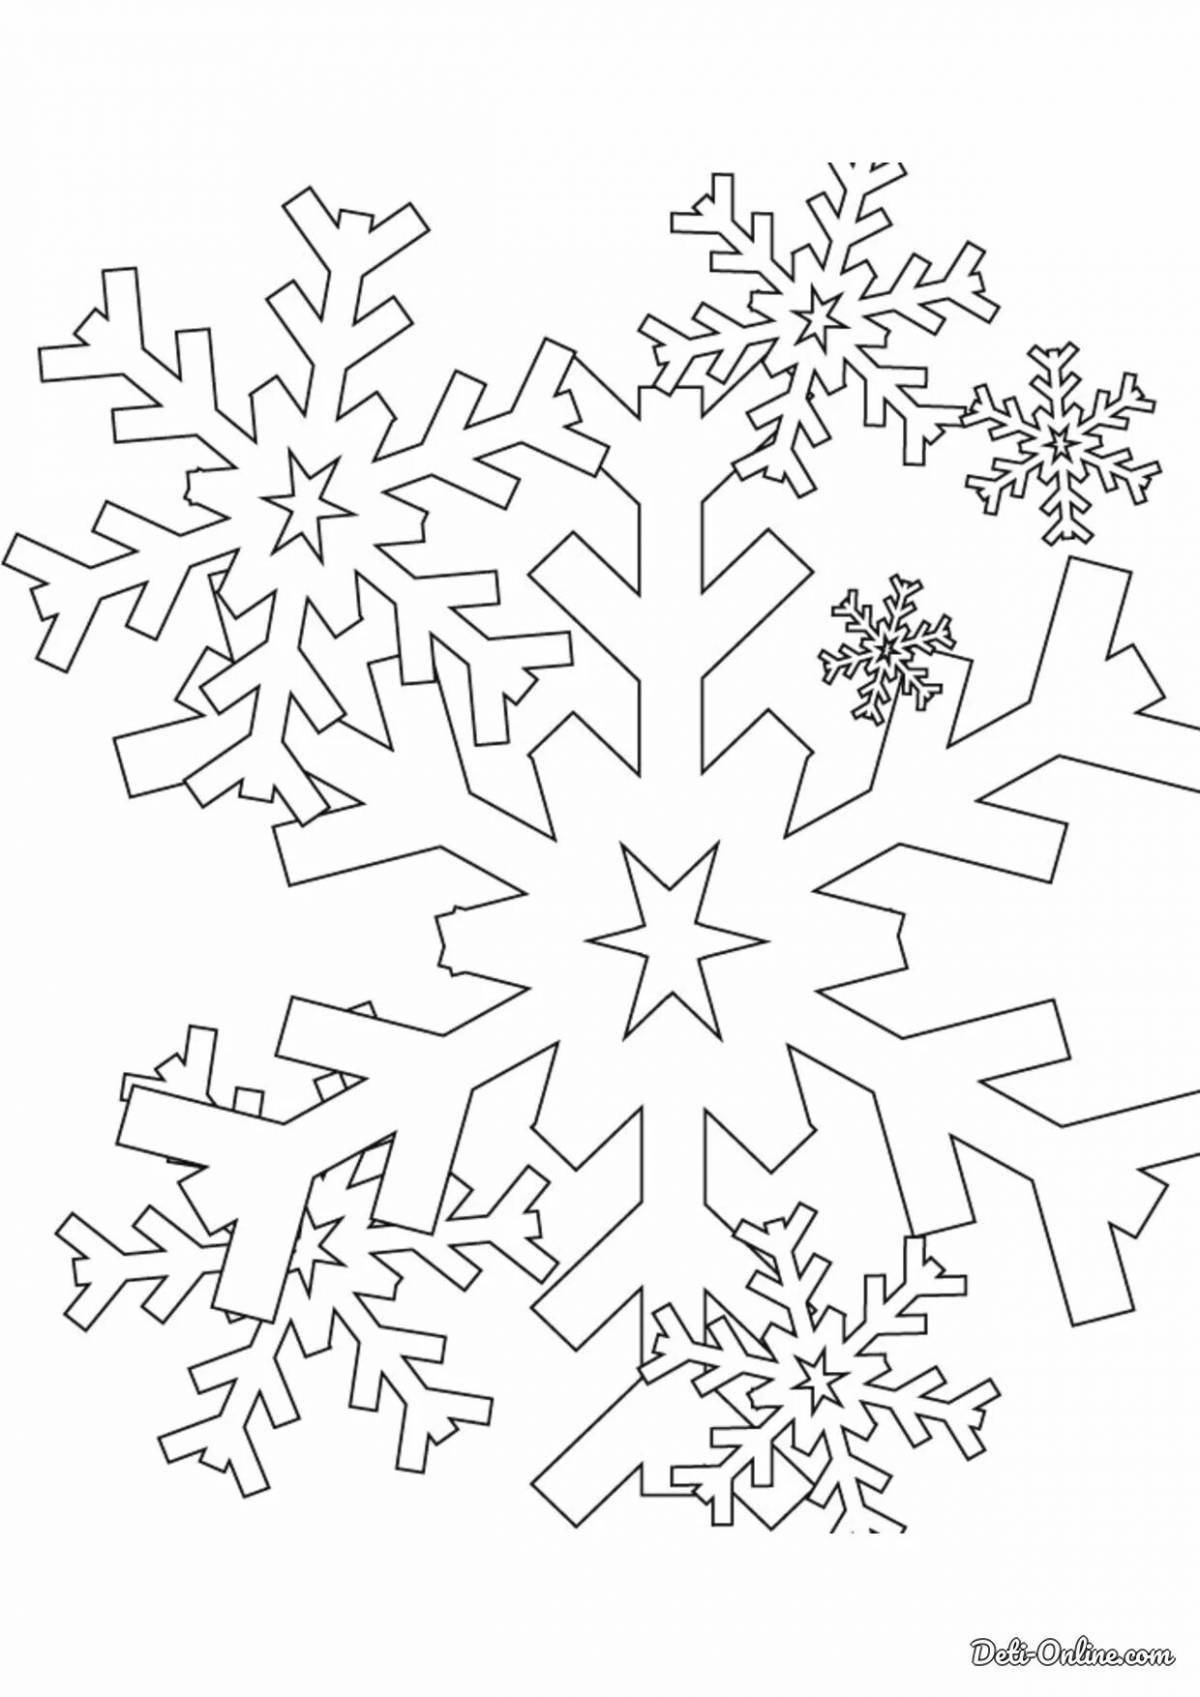 Fantastic frosty window coloring patterns for kids